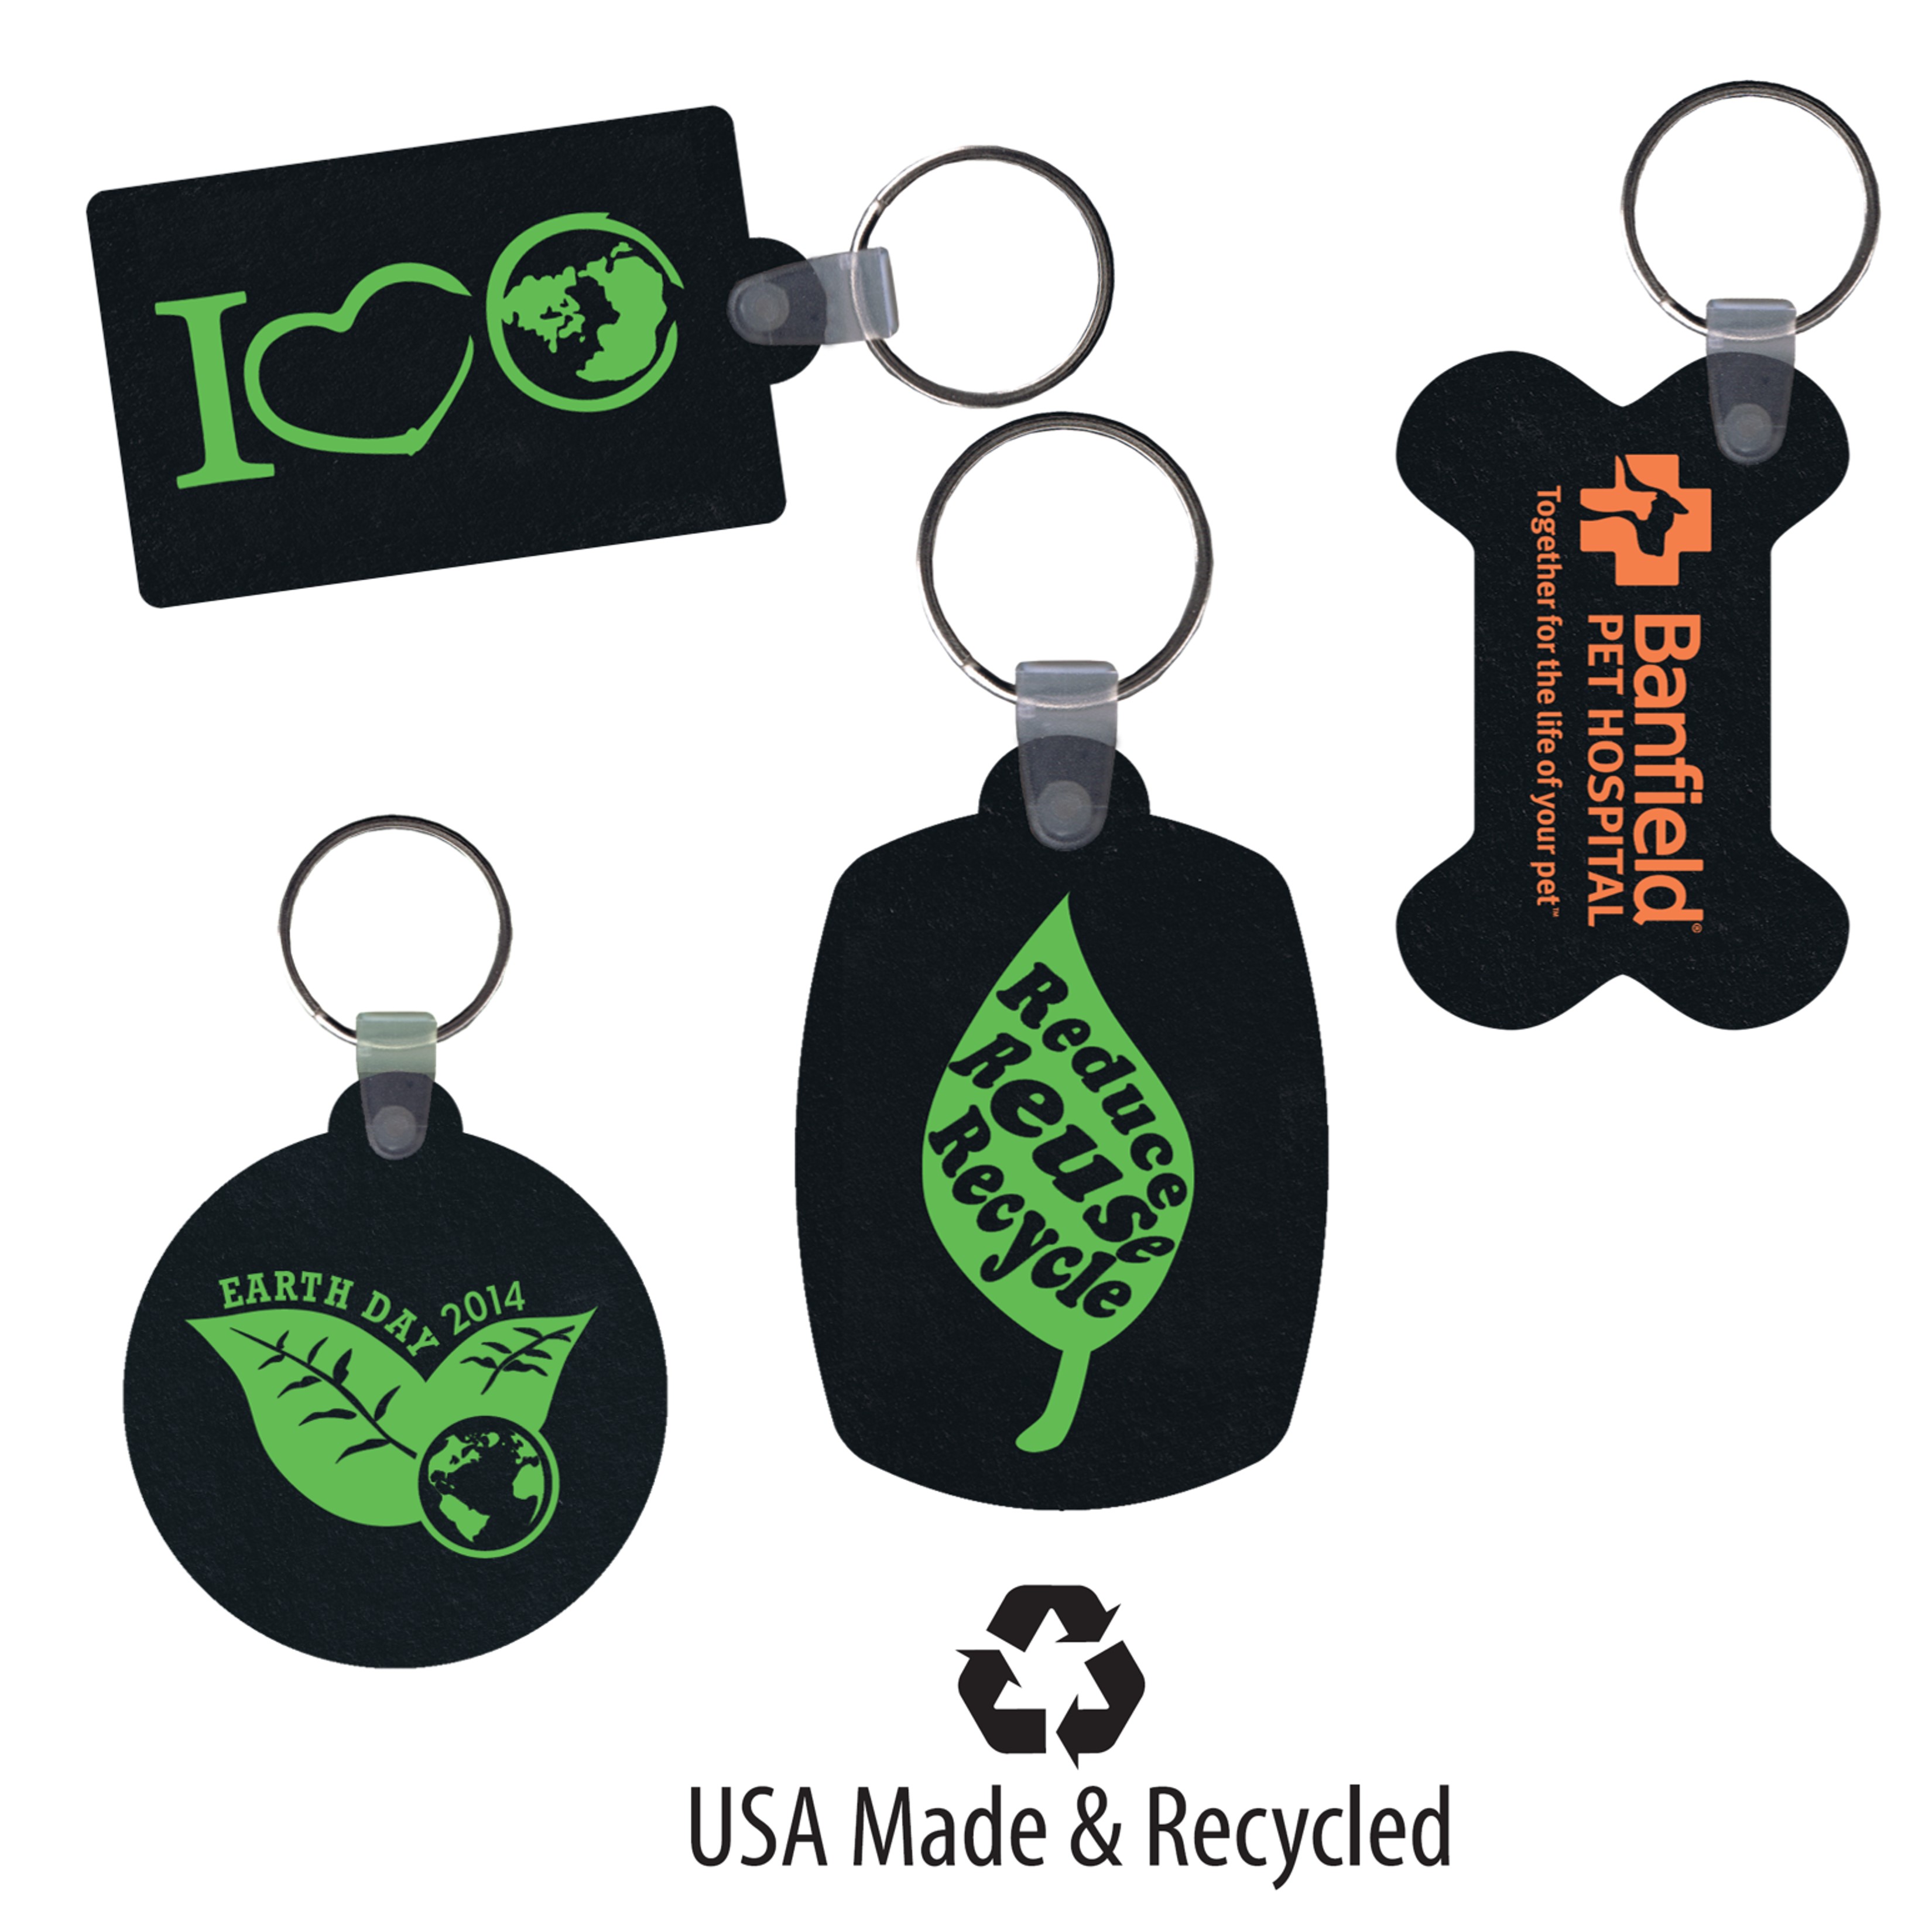 USA made recycled rubber tire keychain key tags Custom sustainable promotional